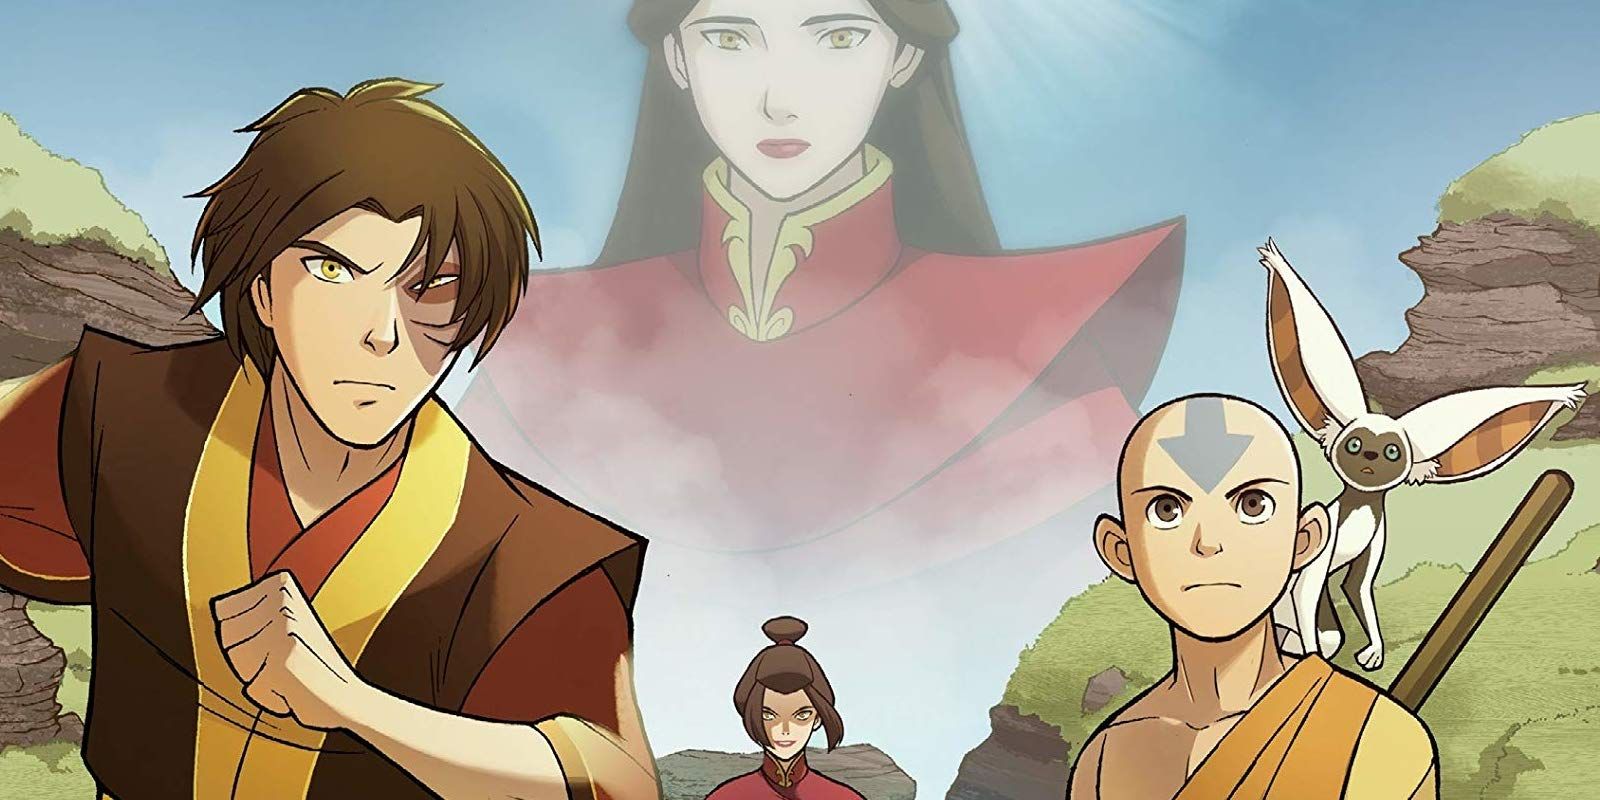 Avatar: The Last Airbender - The Search Deserves an Animated Film